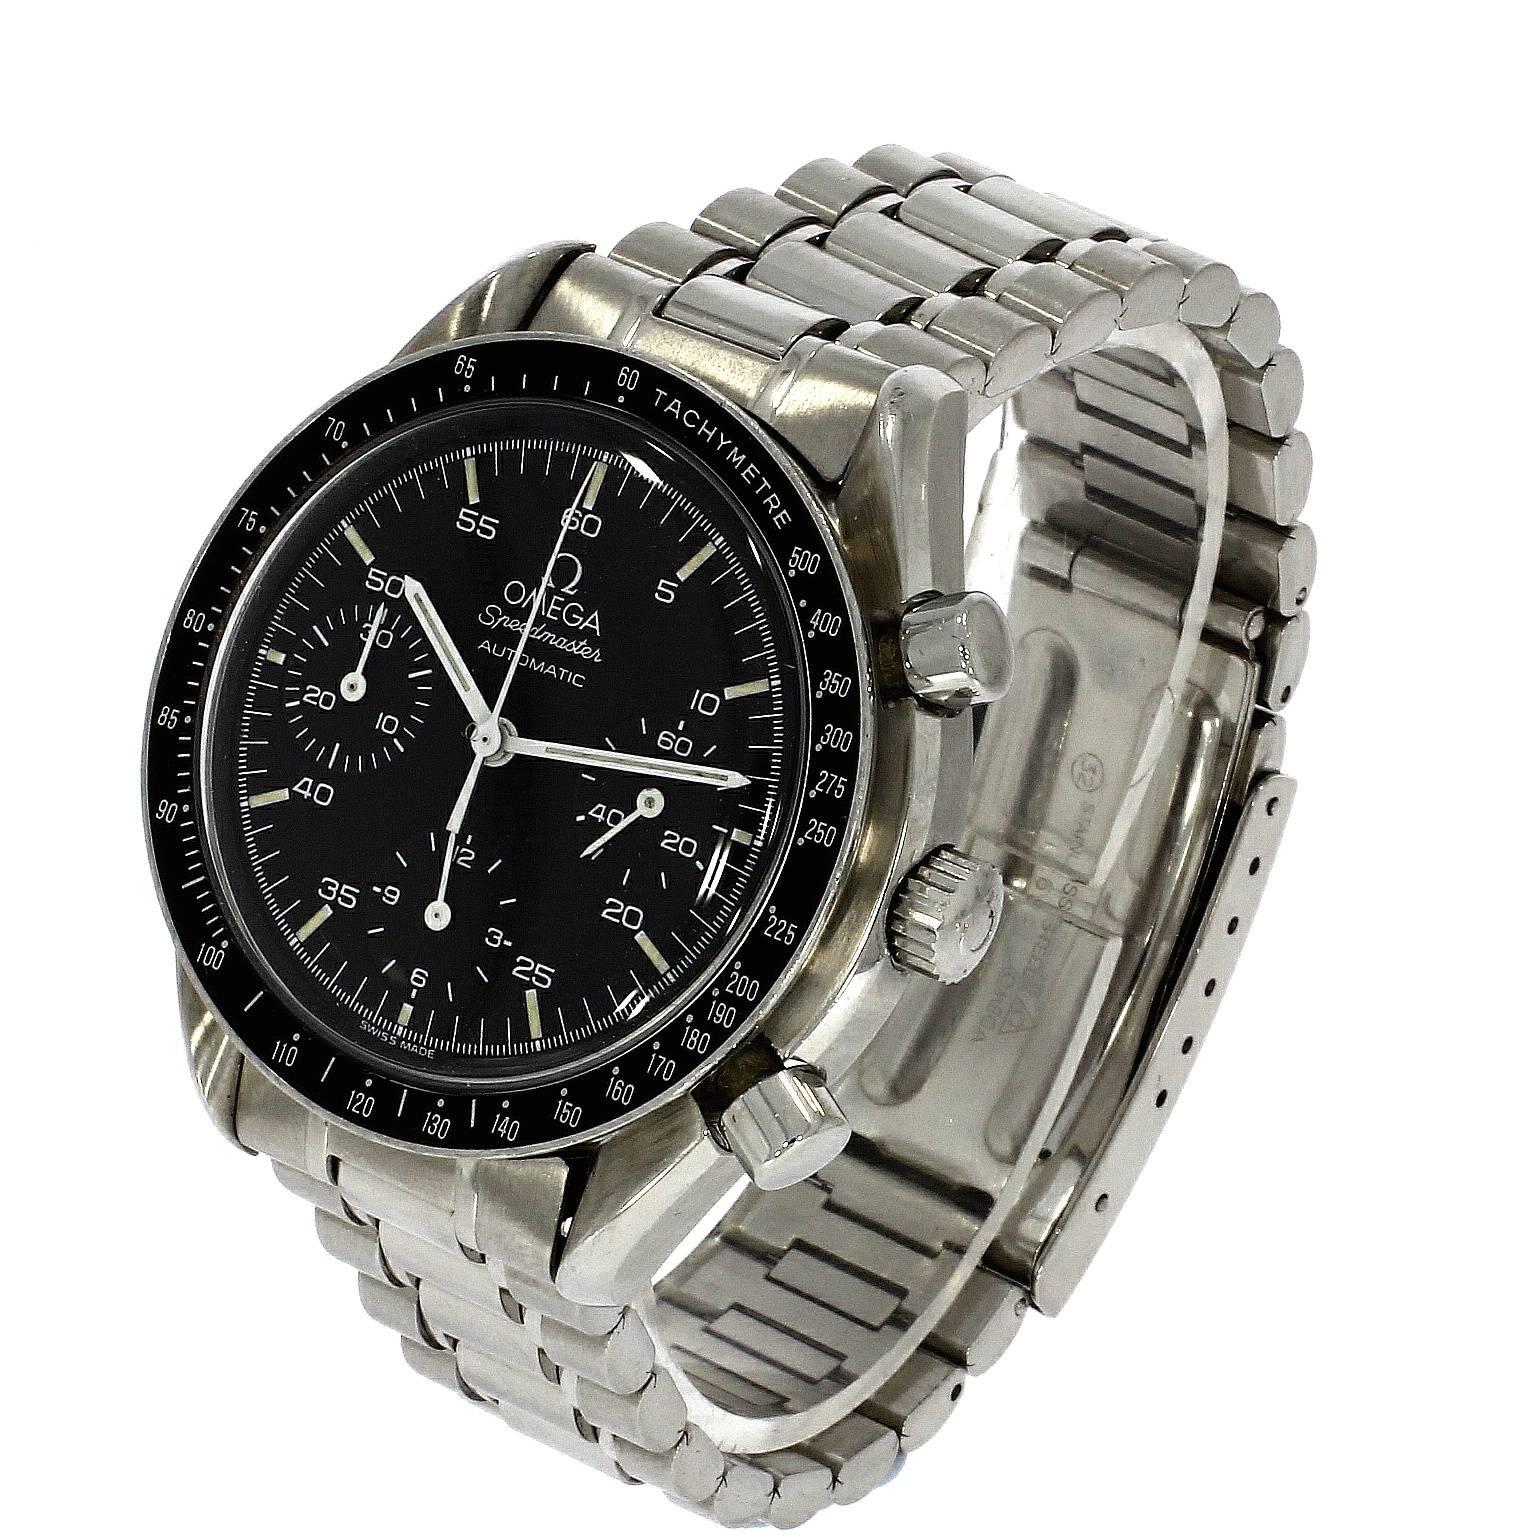 Designed to be a less-expensive, smaller, automatic version of the Omega classic Speedmaster Professional. In contrast to the original Speedmaster, it has an automatic movement with wider-spaced subdials and Arabic numerals on the dial.

This Omega